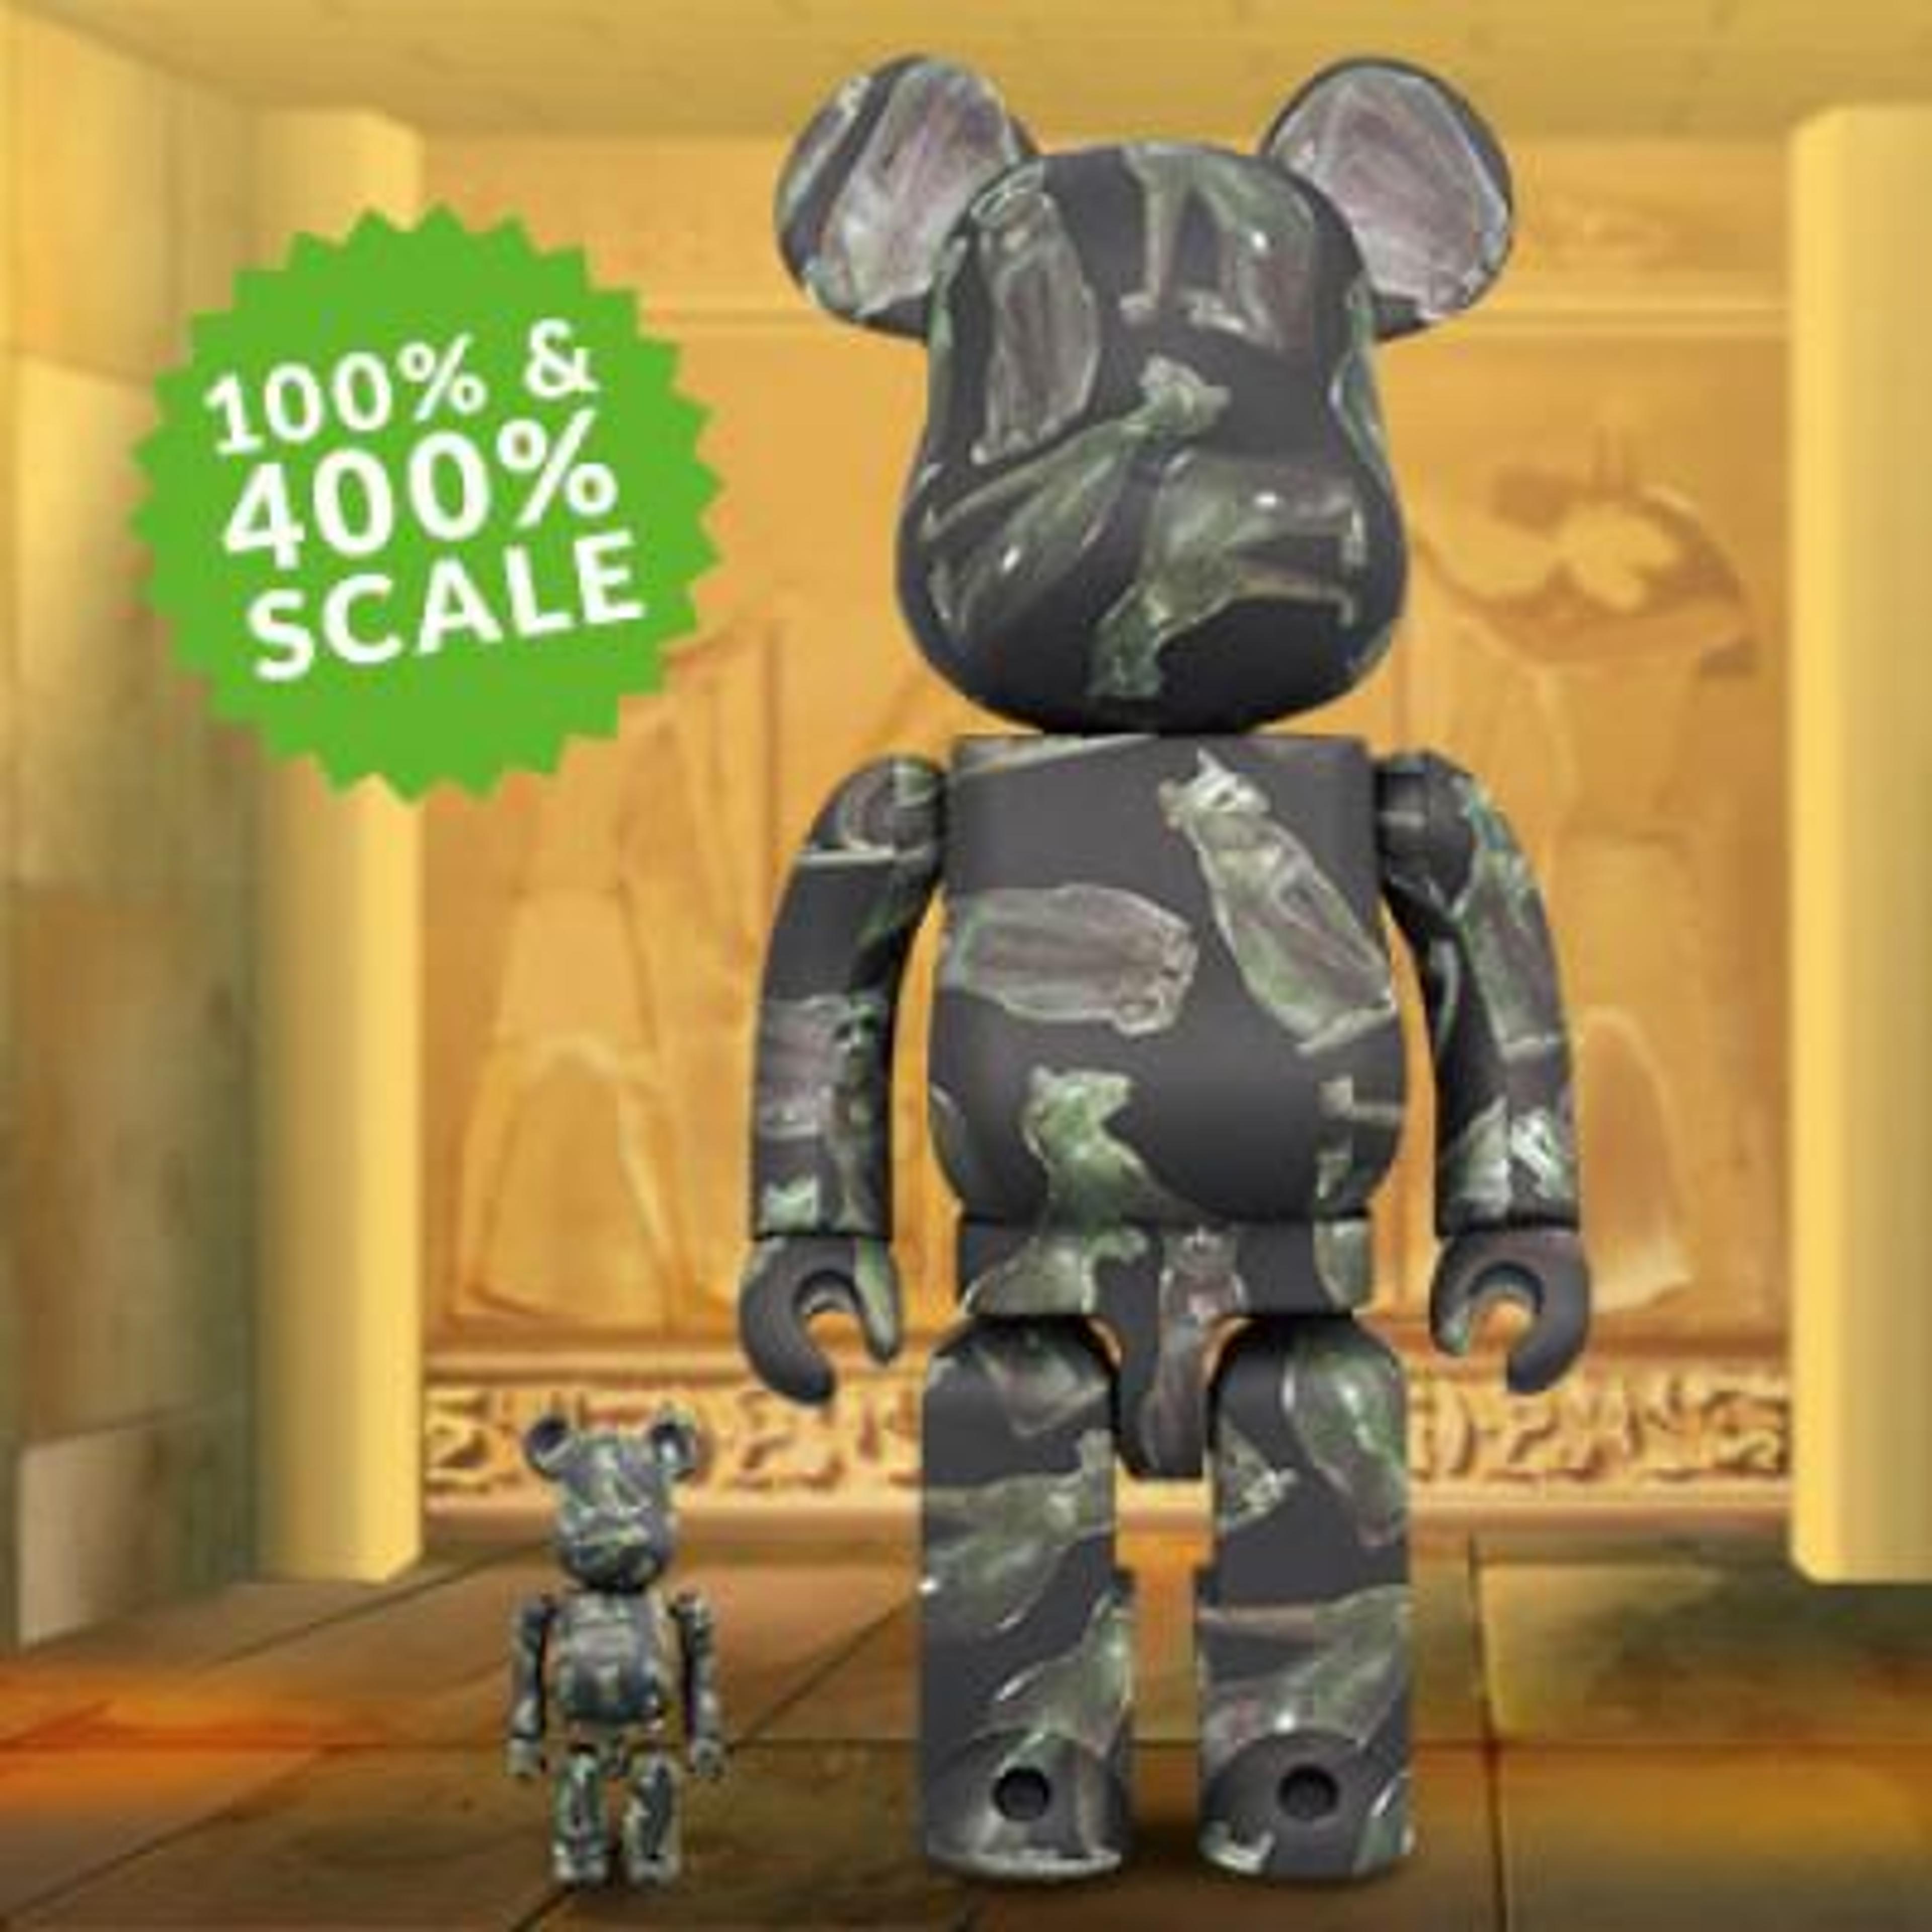 BE@RBRICK THE GAYER-ANDERSON CAT 100% & 400% Bearbrick by Medicom Toy